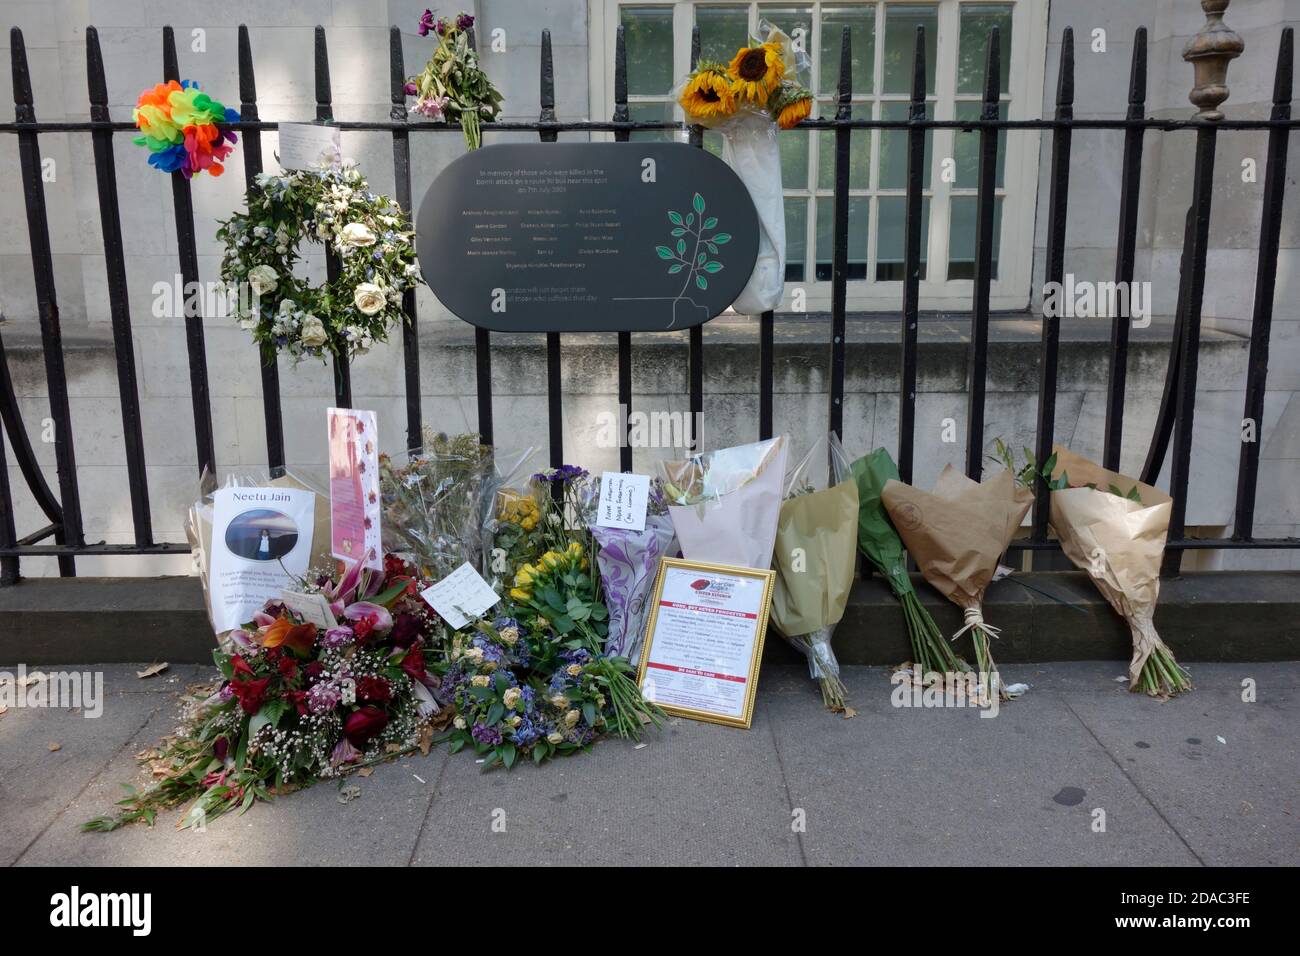 Memorial to those killed by a terrorist bomb on a No. 30 bus in Tavistock Square on the 7th July 2005 Stock Photo